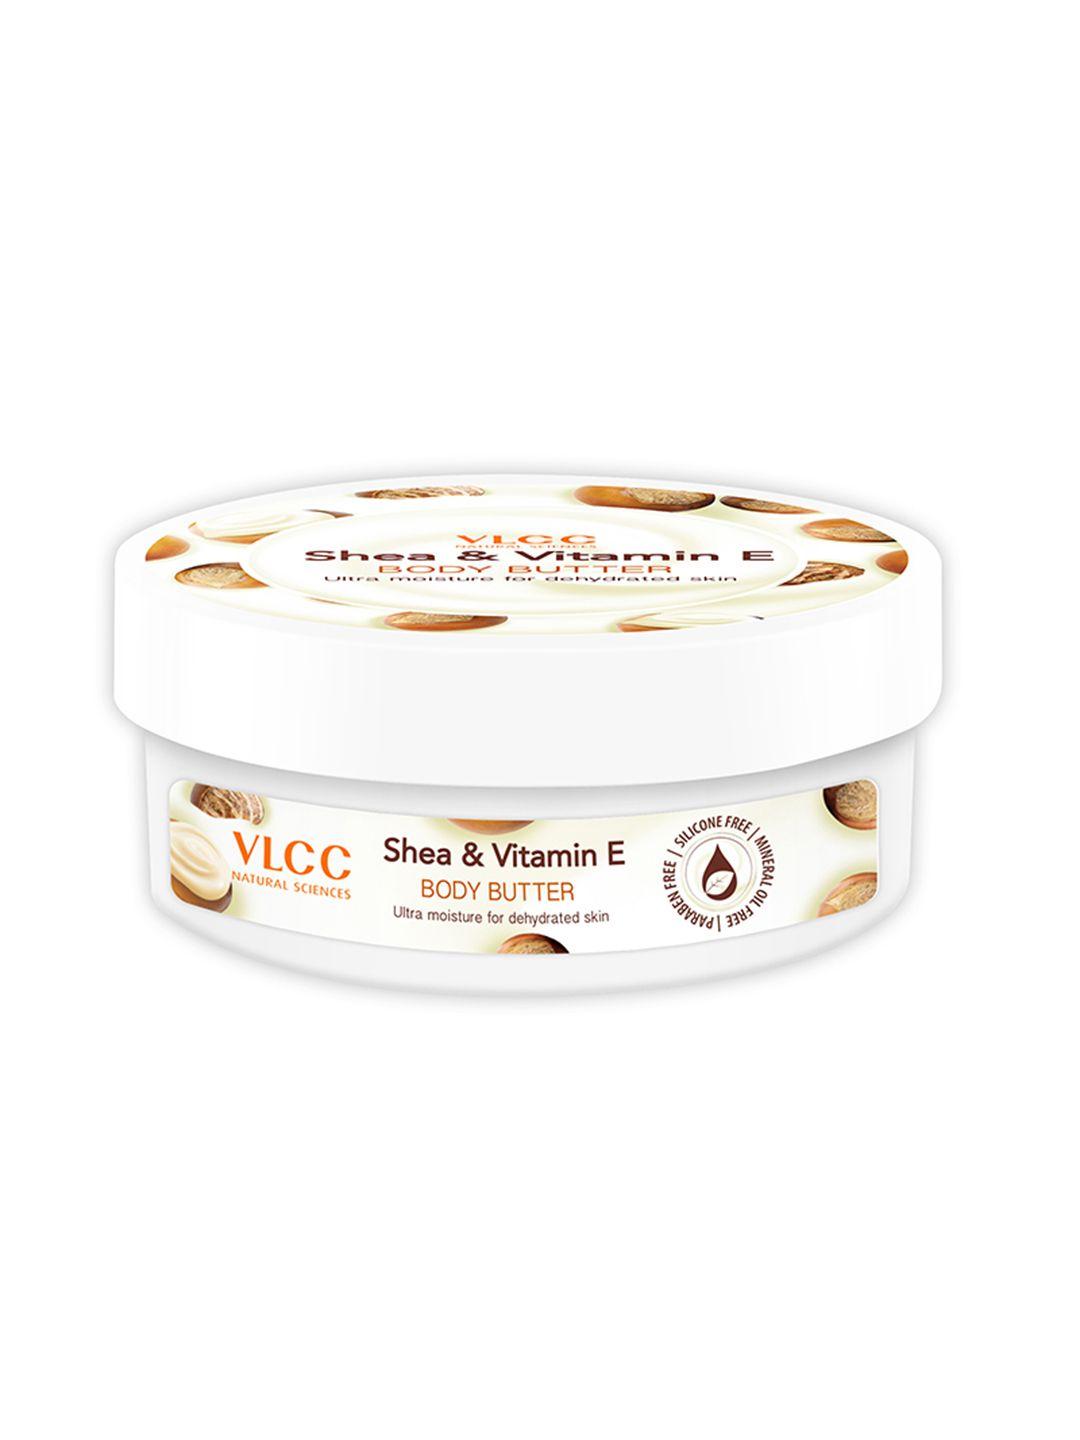 vlcc paraben free & silicone free body butter with shea & vitamin e - 200 g